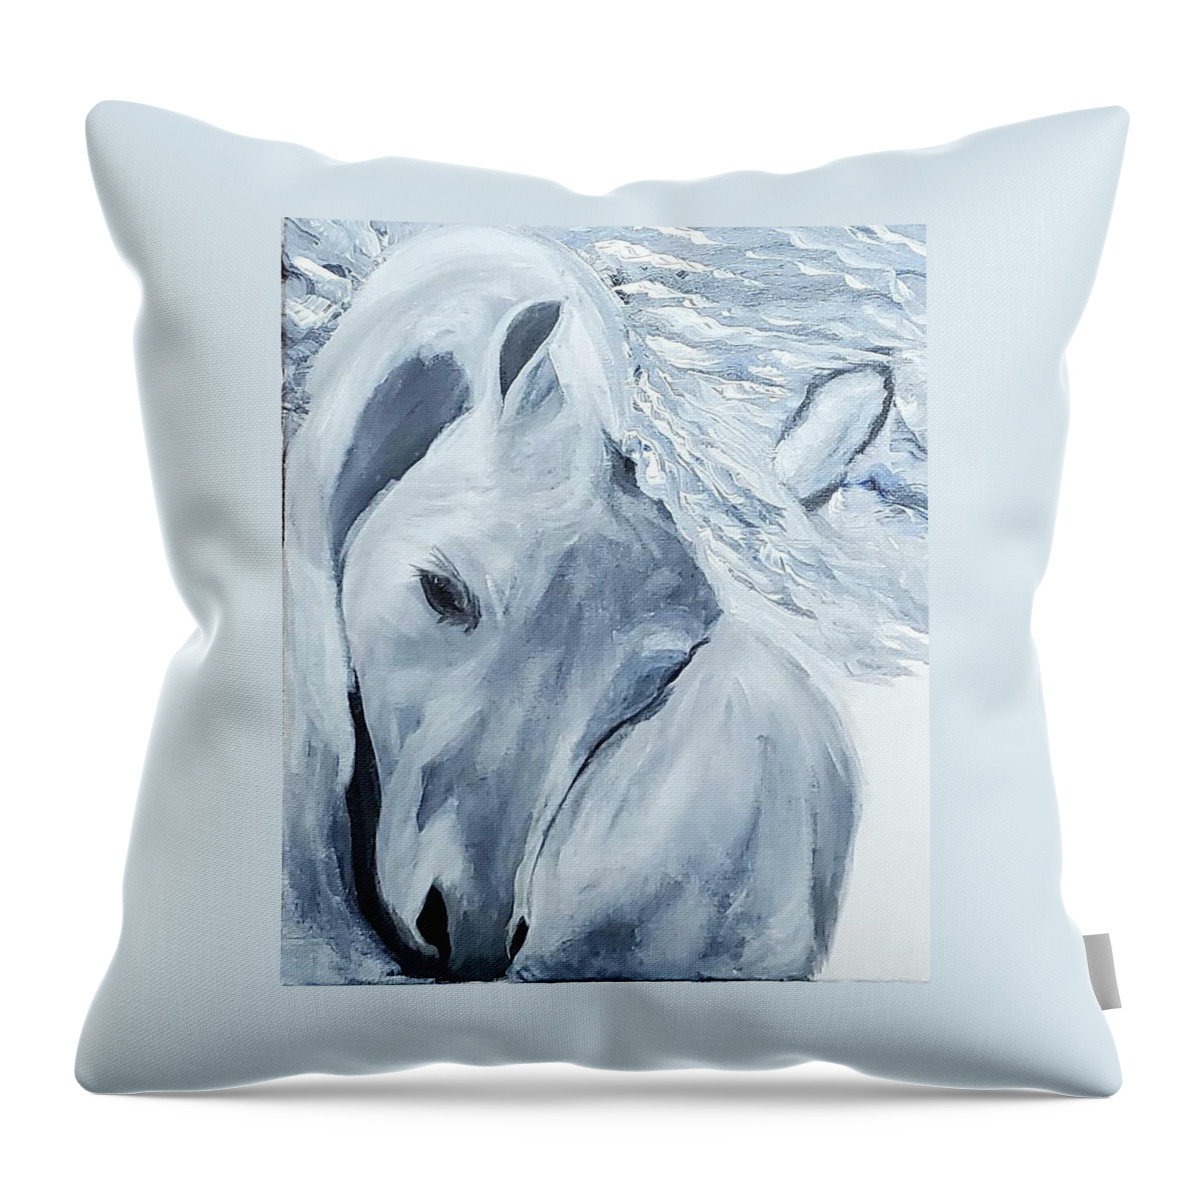  Throw Pillow featuring the painting White Horse by Amy Kuenzie